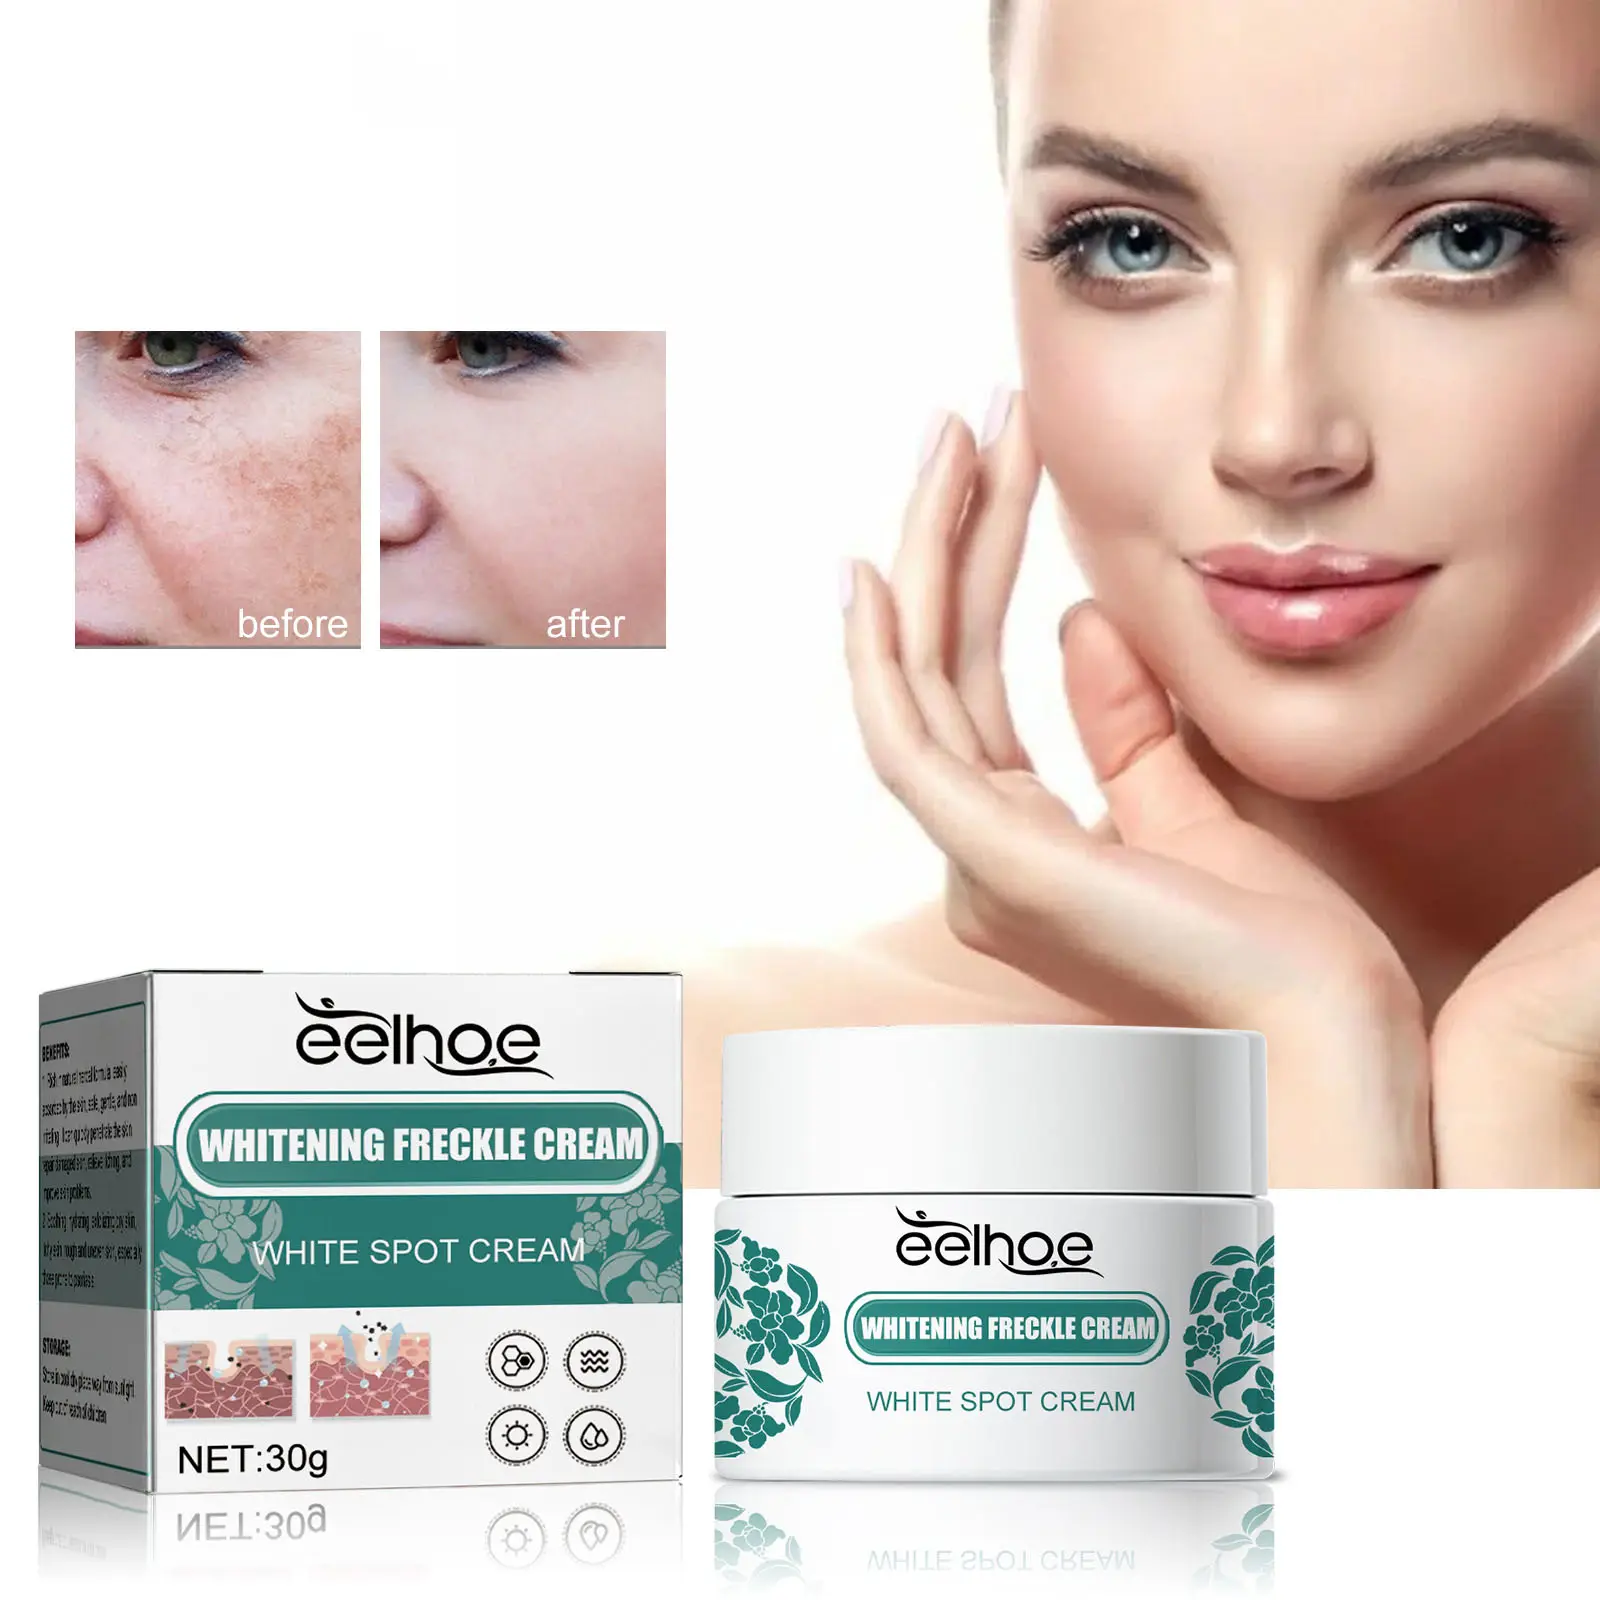 Whitening and Spotting Cream to Lighten Spots, Moisturize and Moisturize the Skin, Whiten, Transparent, and Anti Aging